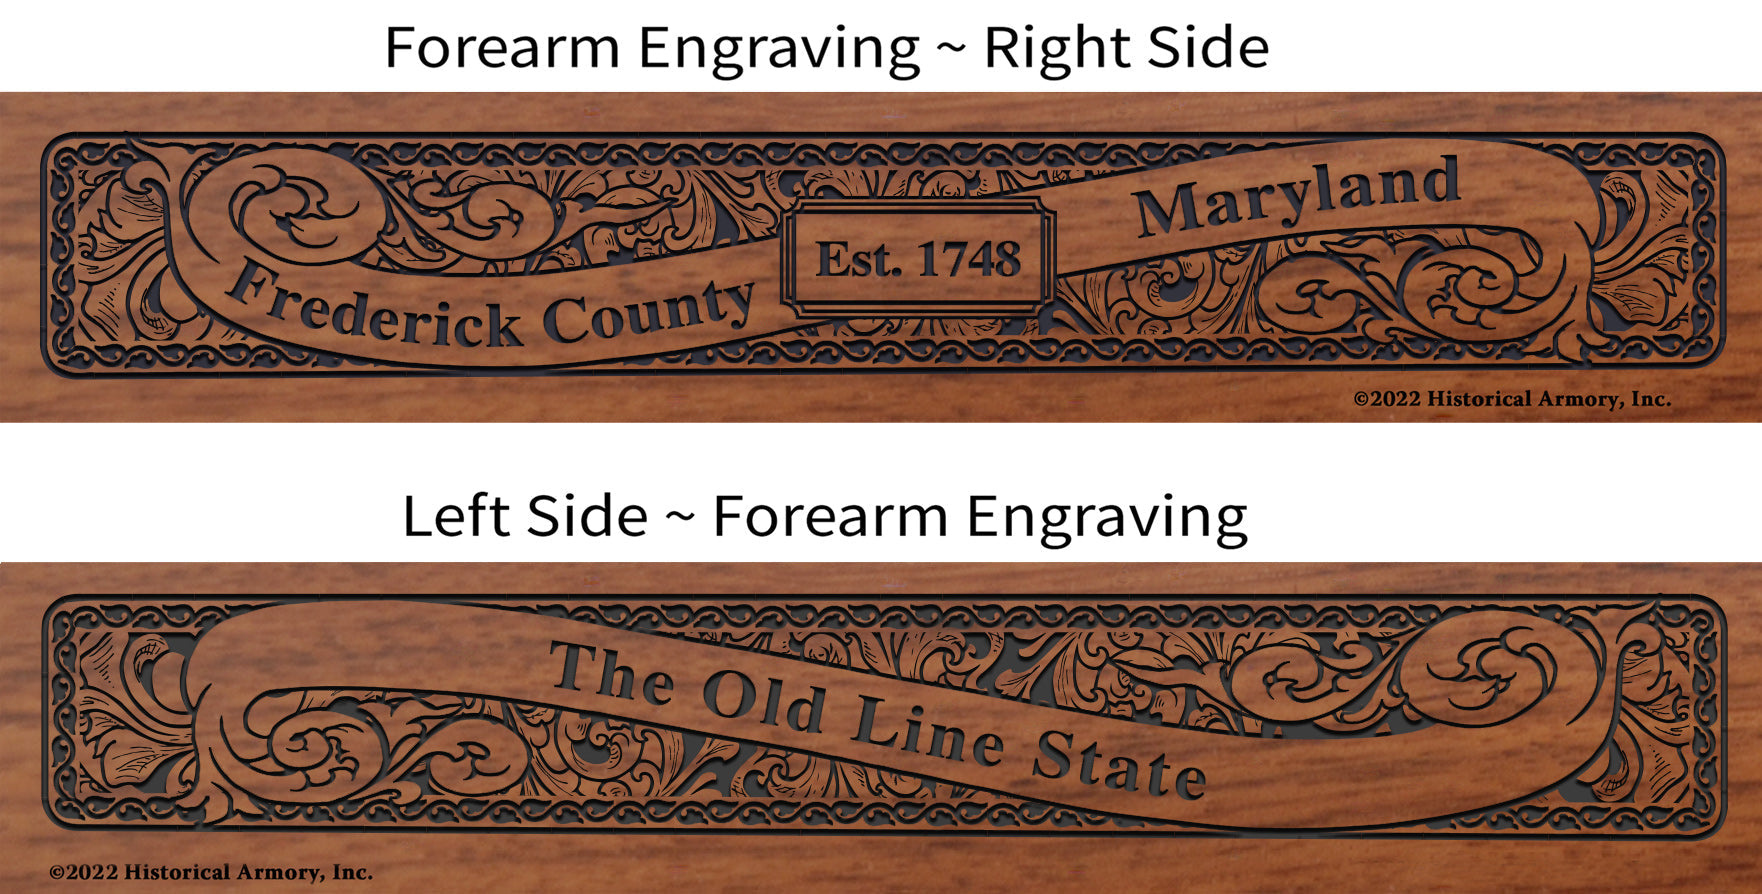 Frederick County Maryland Engraved Rifle Forearm